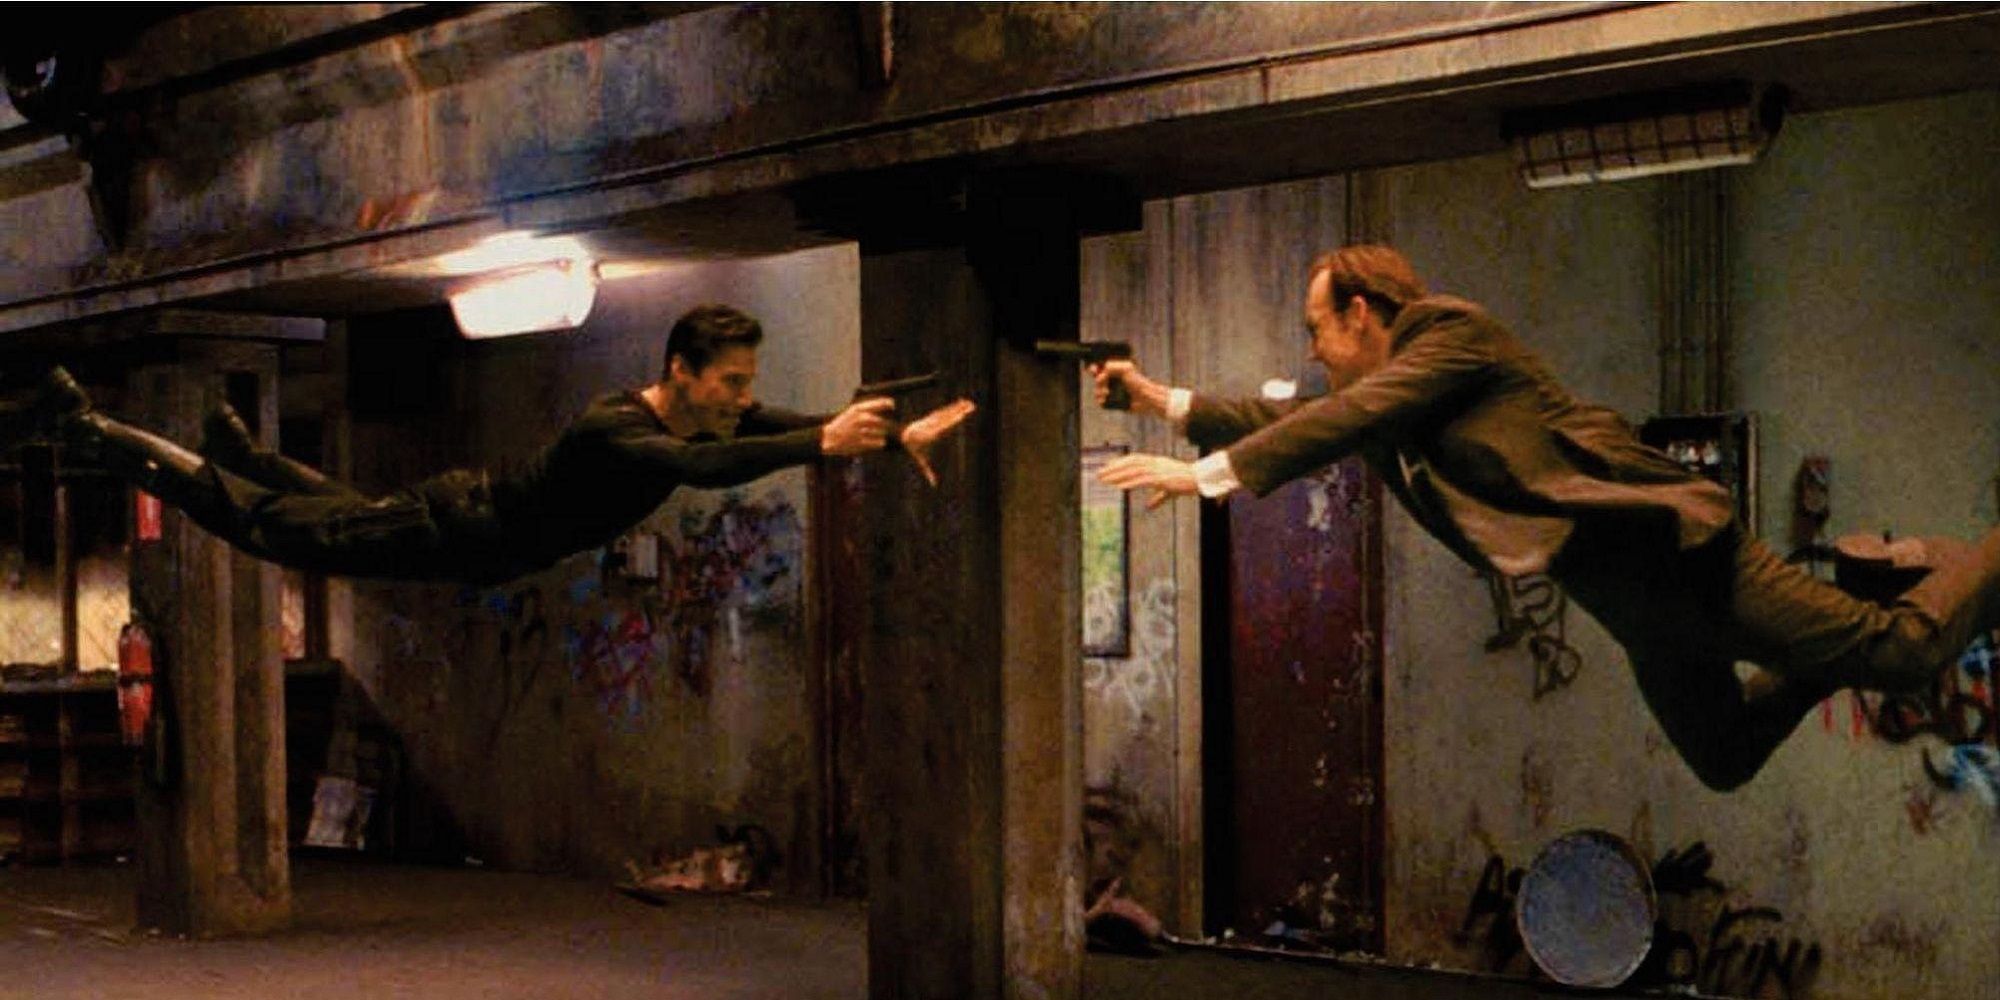 Neo and Agent Smith jumping at each other firing guns in The Matrix